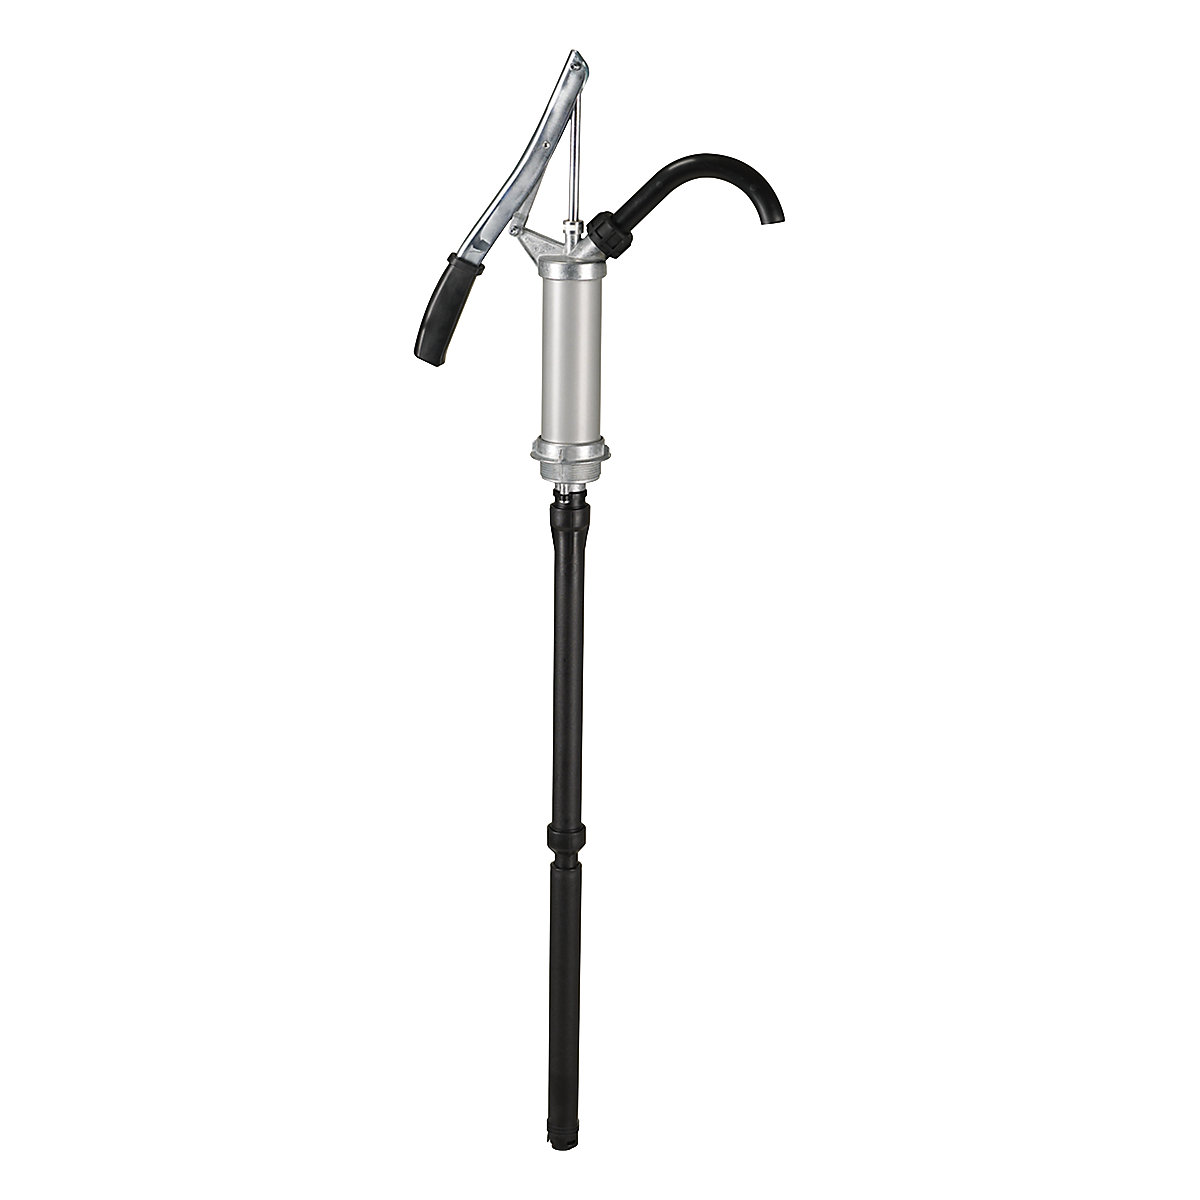 Lever operated cylinder-type manual pump – PRESSOL